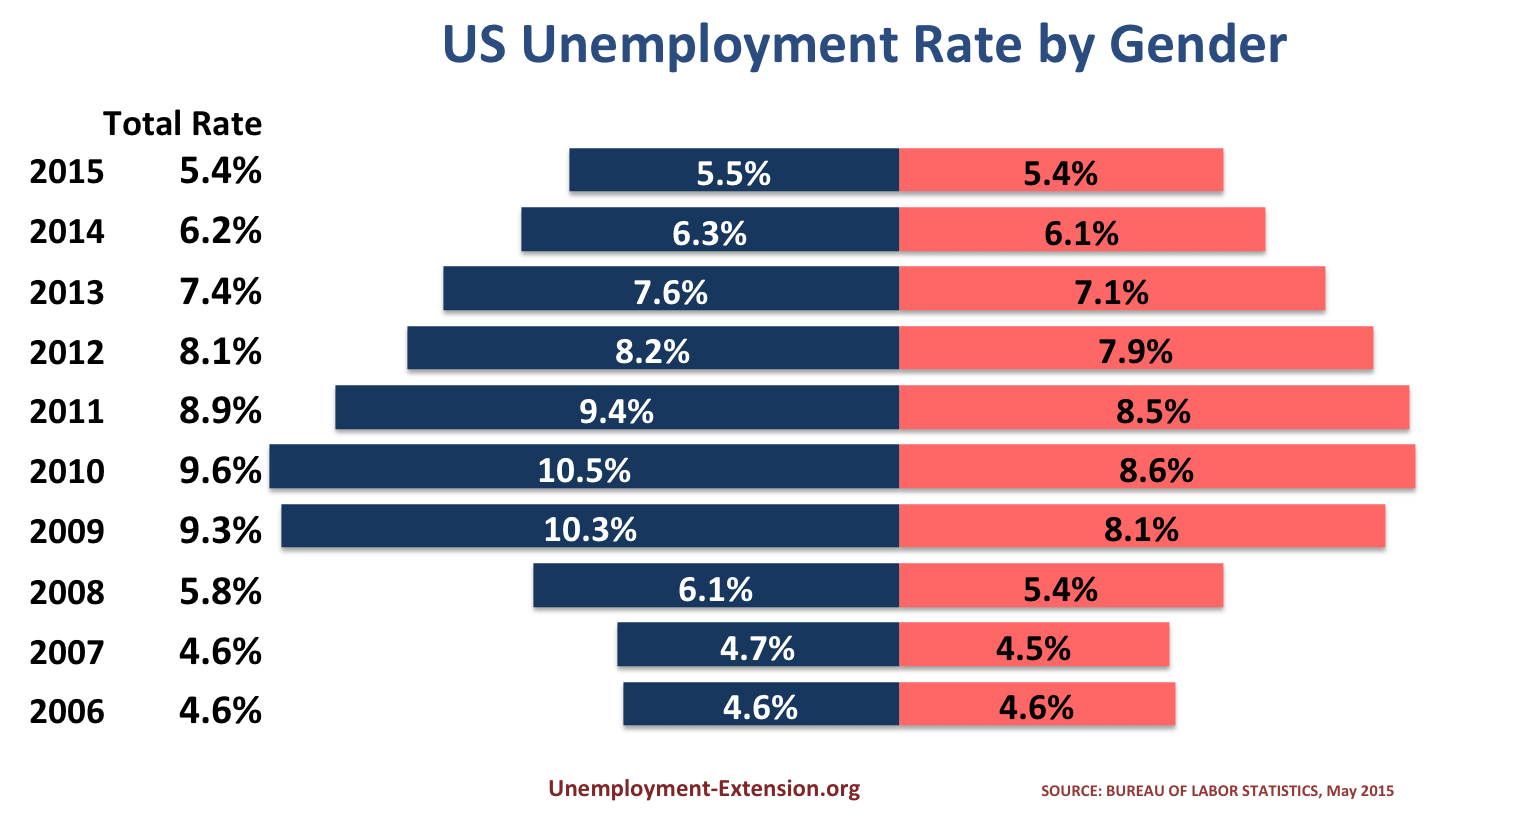 US Unemployment Rate by Gender, May 2015